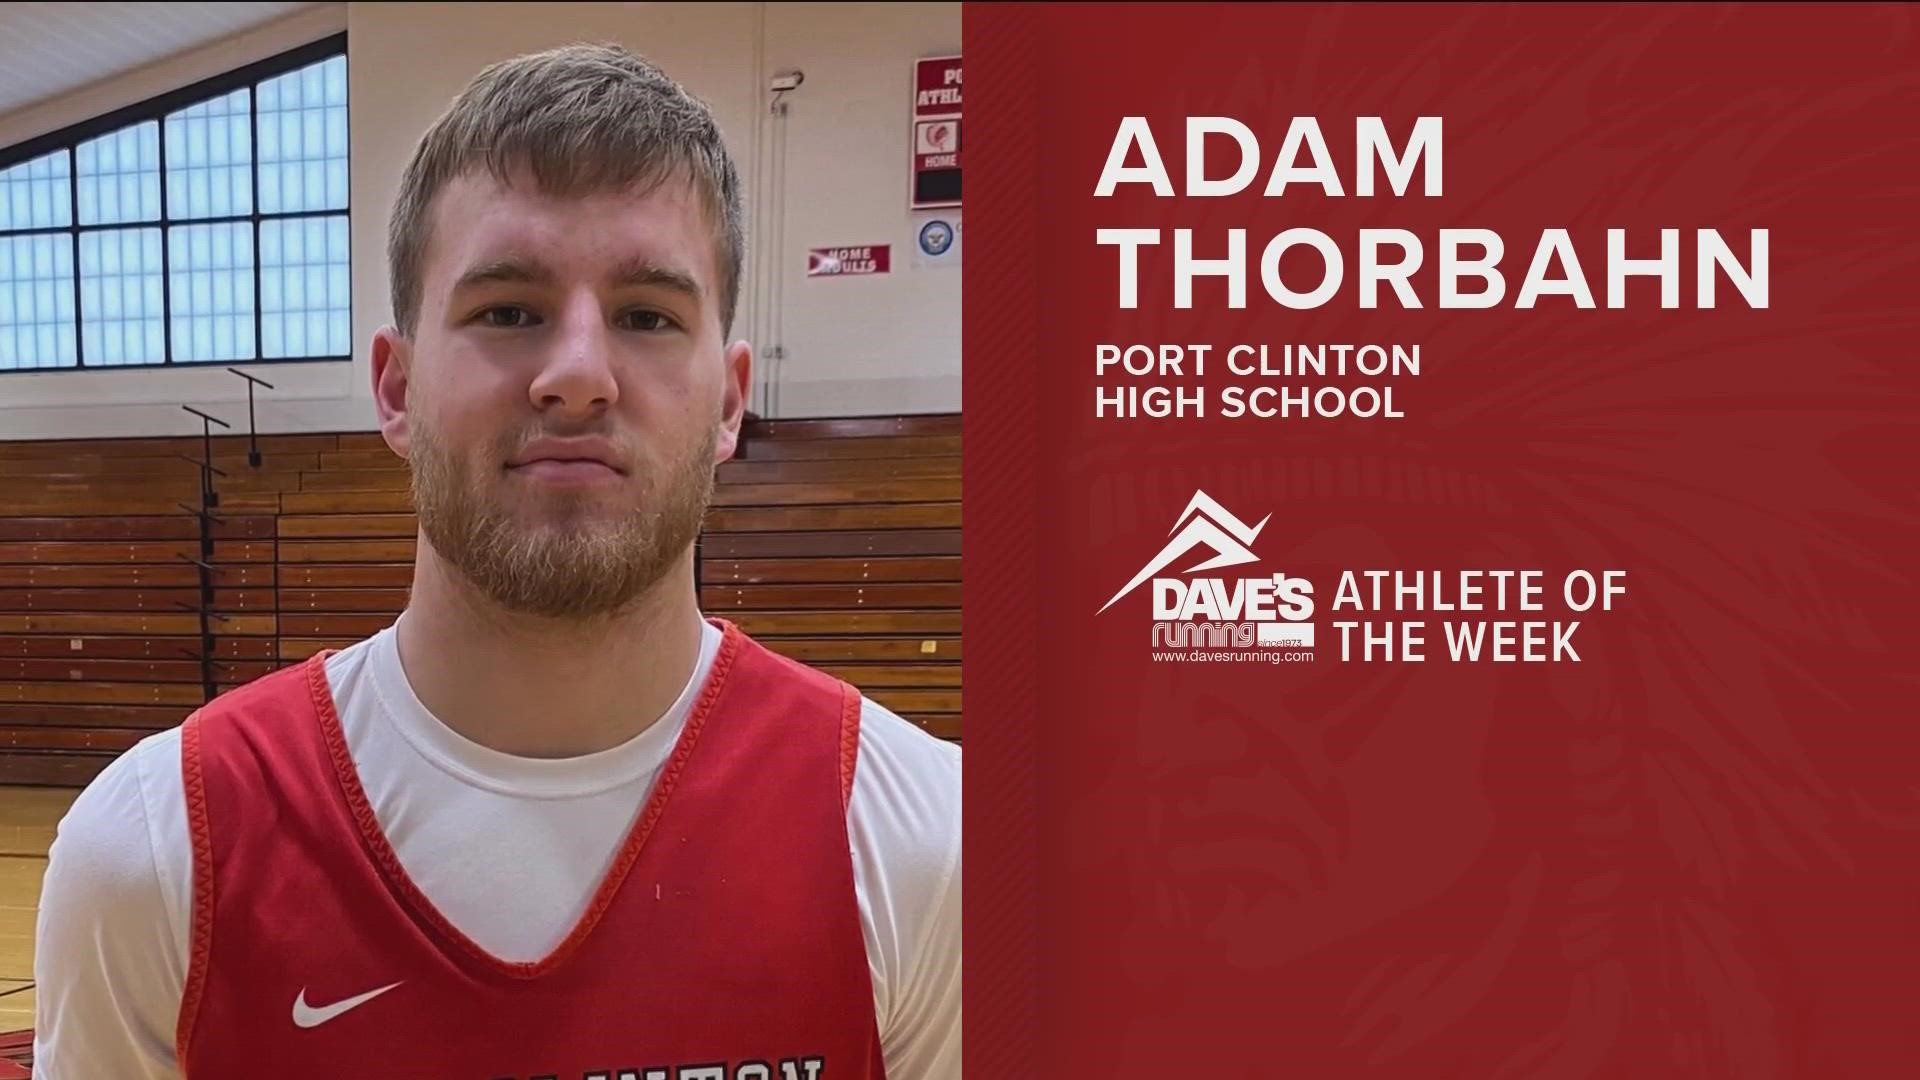 Adam Thorbahn netted his 1,343th career point in a home conference game against Margaretta on February 10